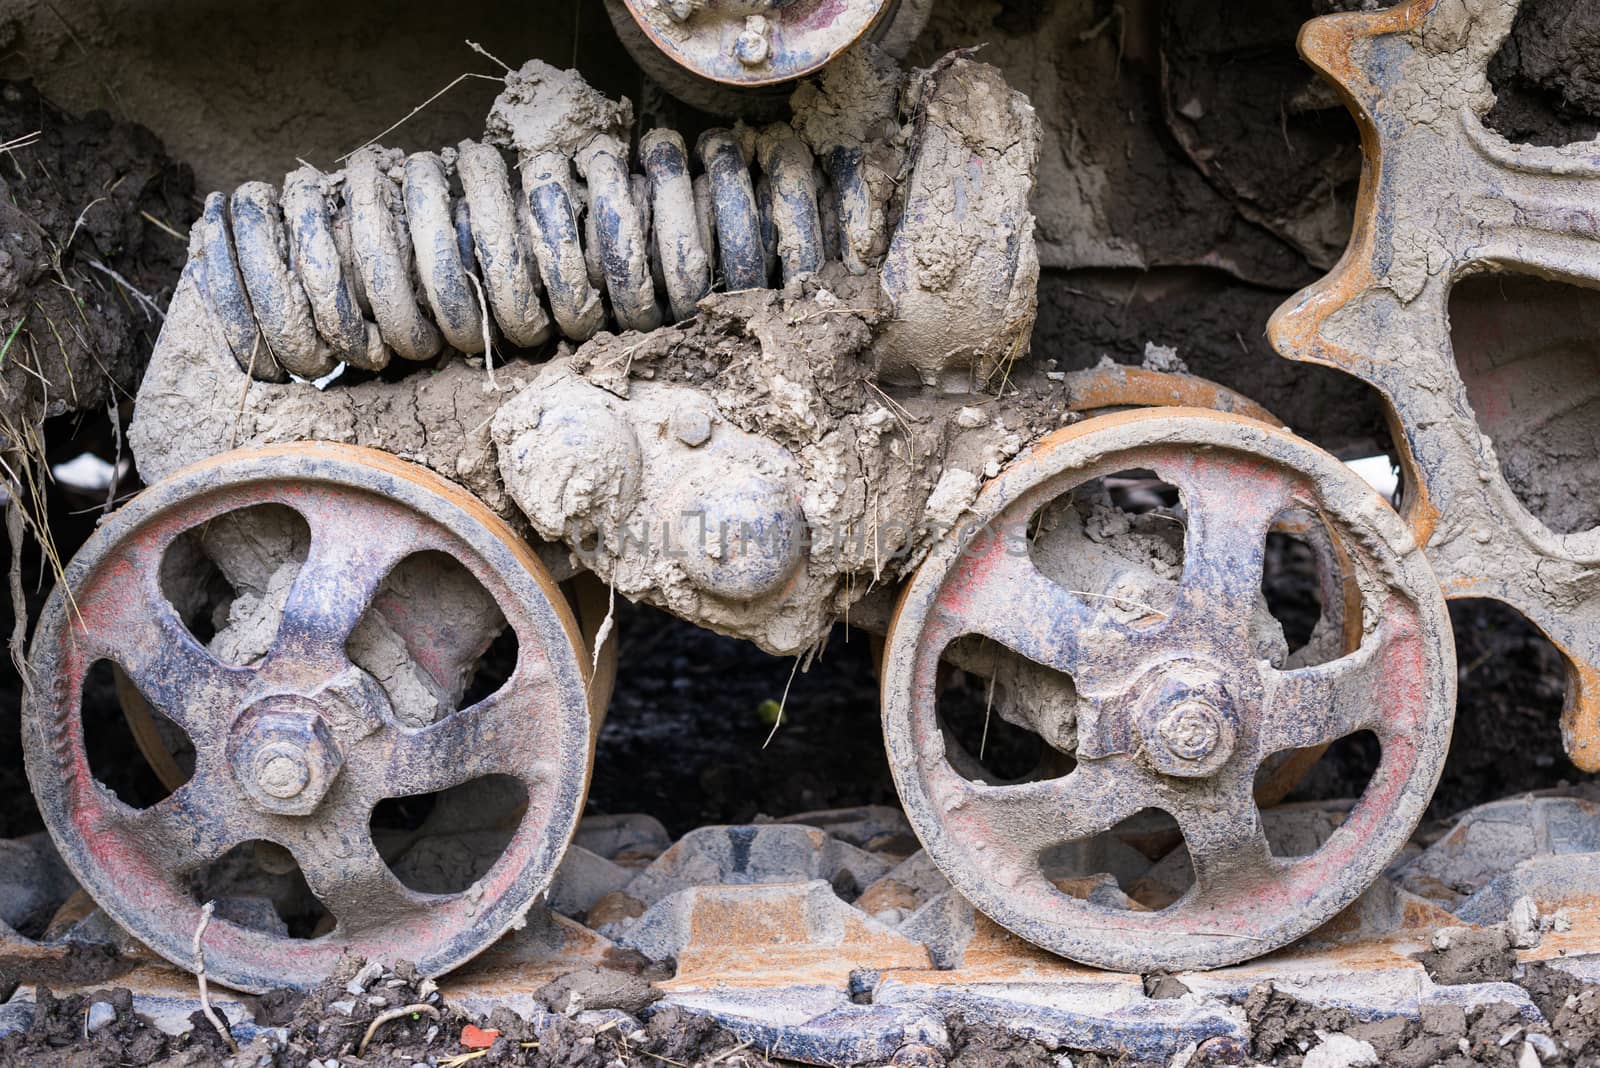 Road wheels of the continuous (caterpillar) tracks with mud. Close up.